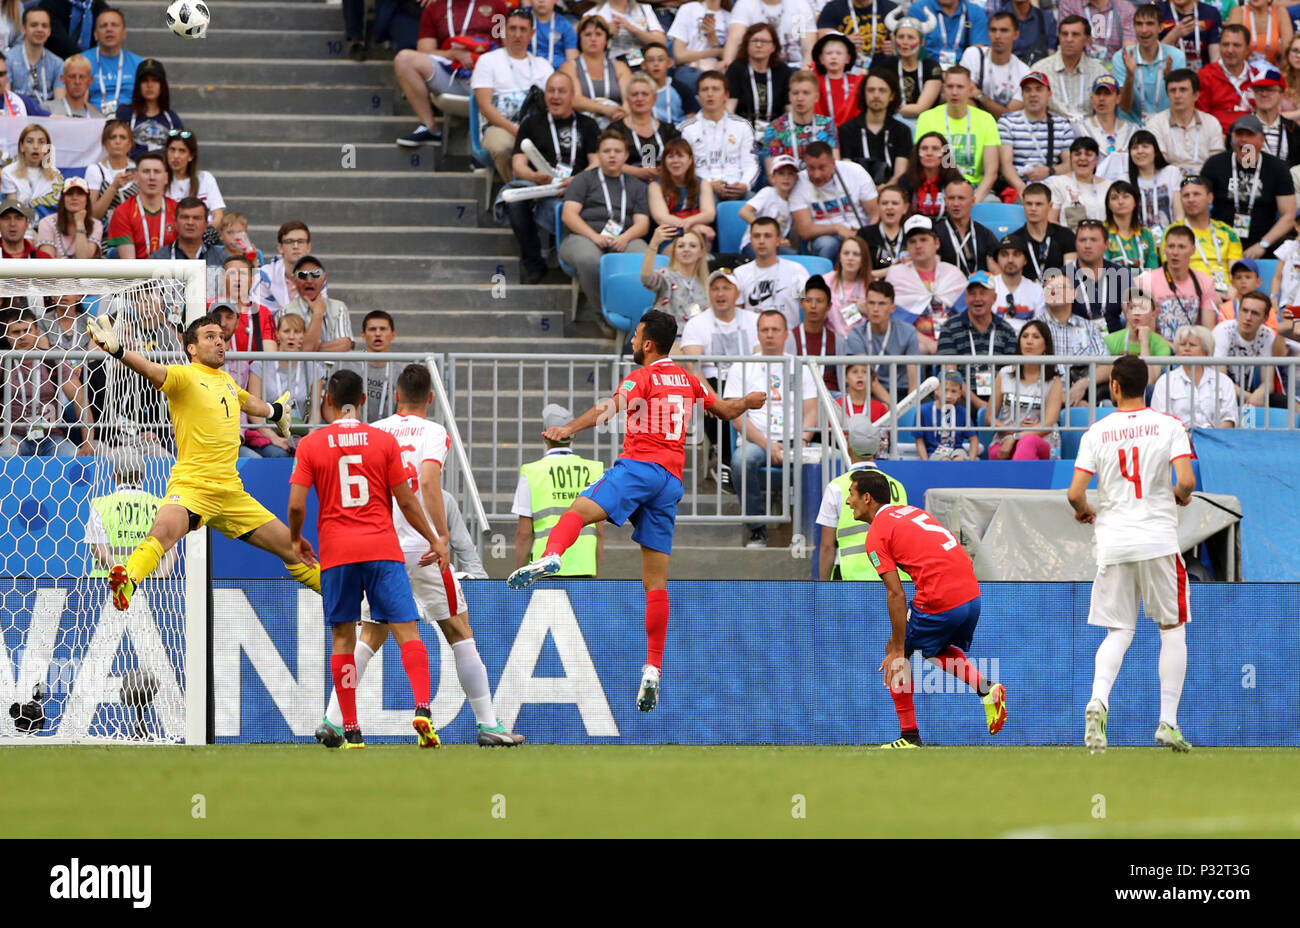 Samara, Russia. 17th June, 2018. Goalkeeper Vladimir Stojkovic (1st L) of Serbia tries to save the ball during a group E match between Costa Rica and Serbia at the 2018 FIFA World Cup in Samara, Russia, June 17, 2018. Credit: Fei Maohua/Xinhua/Alamy Live News Stock Photo